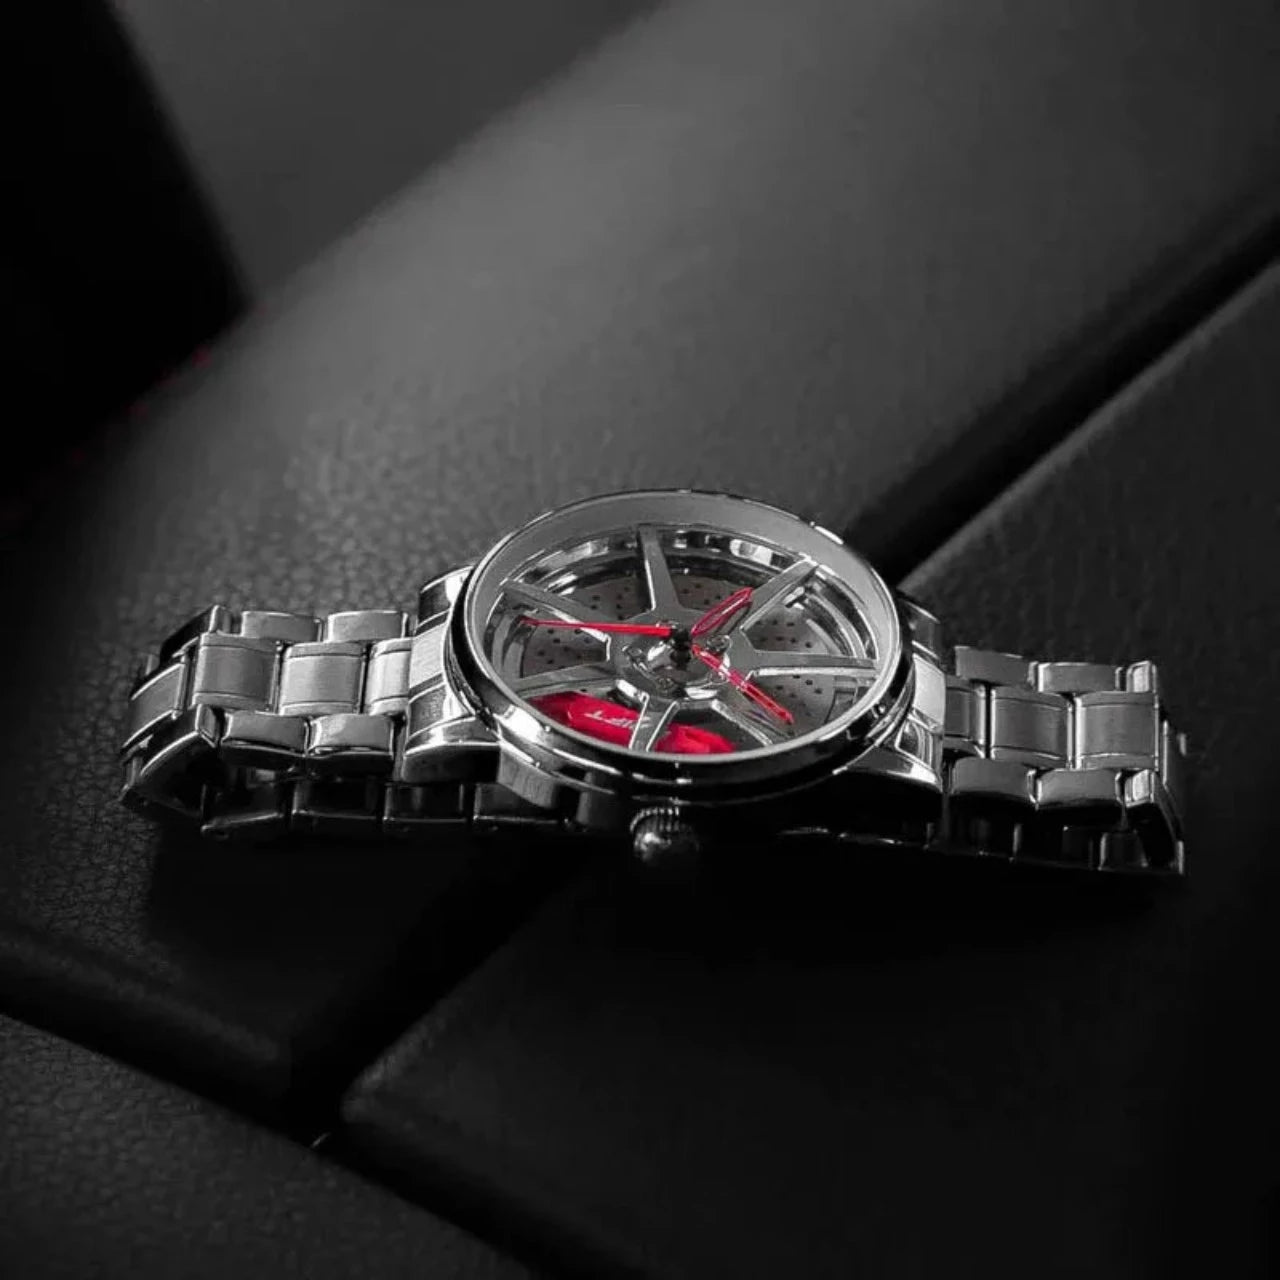 Precision and style combine in the silver Drift Rim Watch. From a German startup, it's designed for motorsport, tuning, and auto enthusiasts. #id_46779157971274